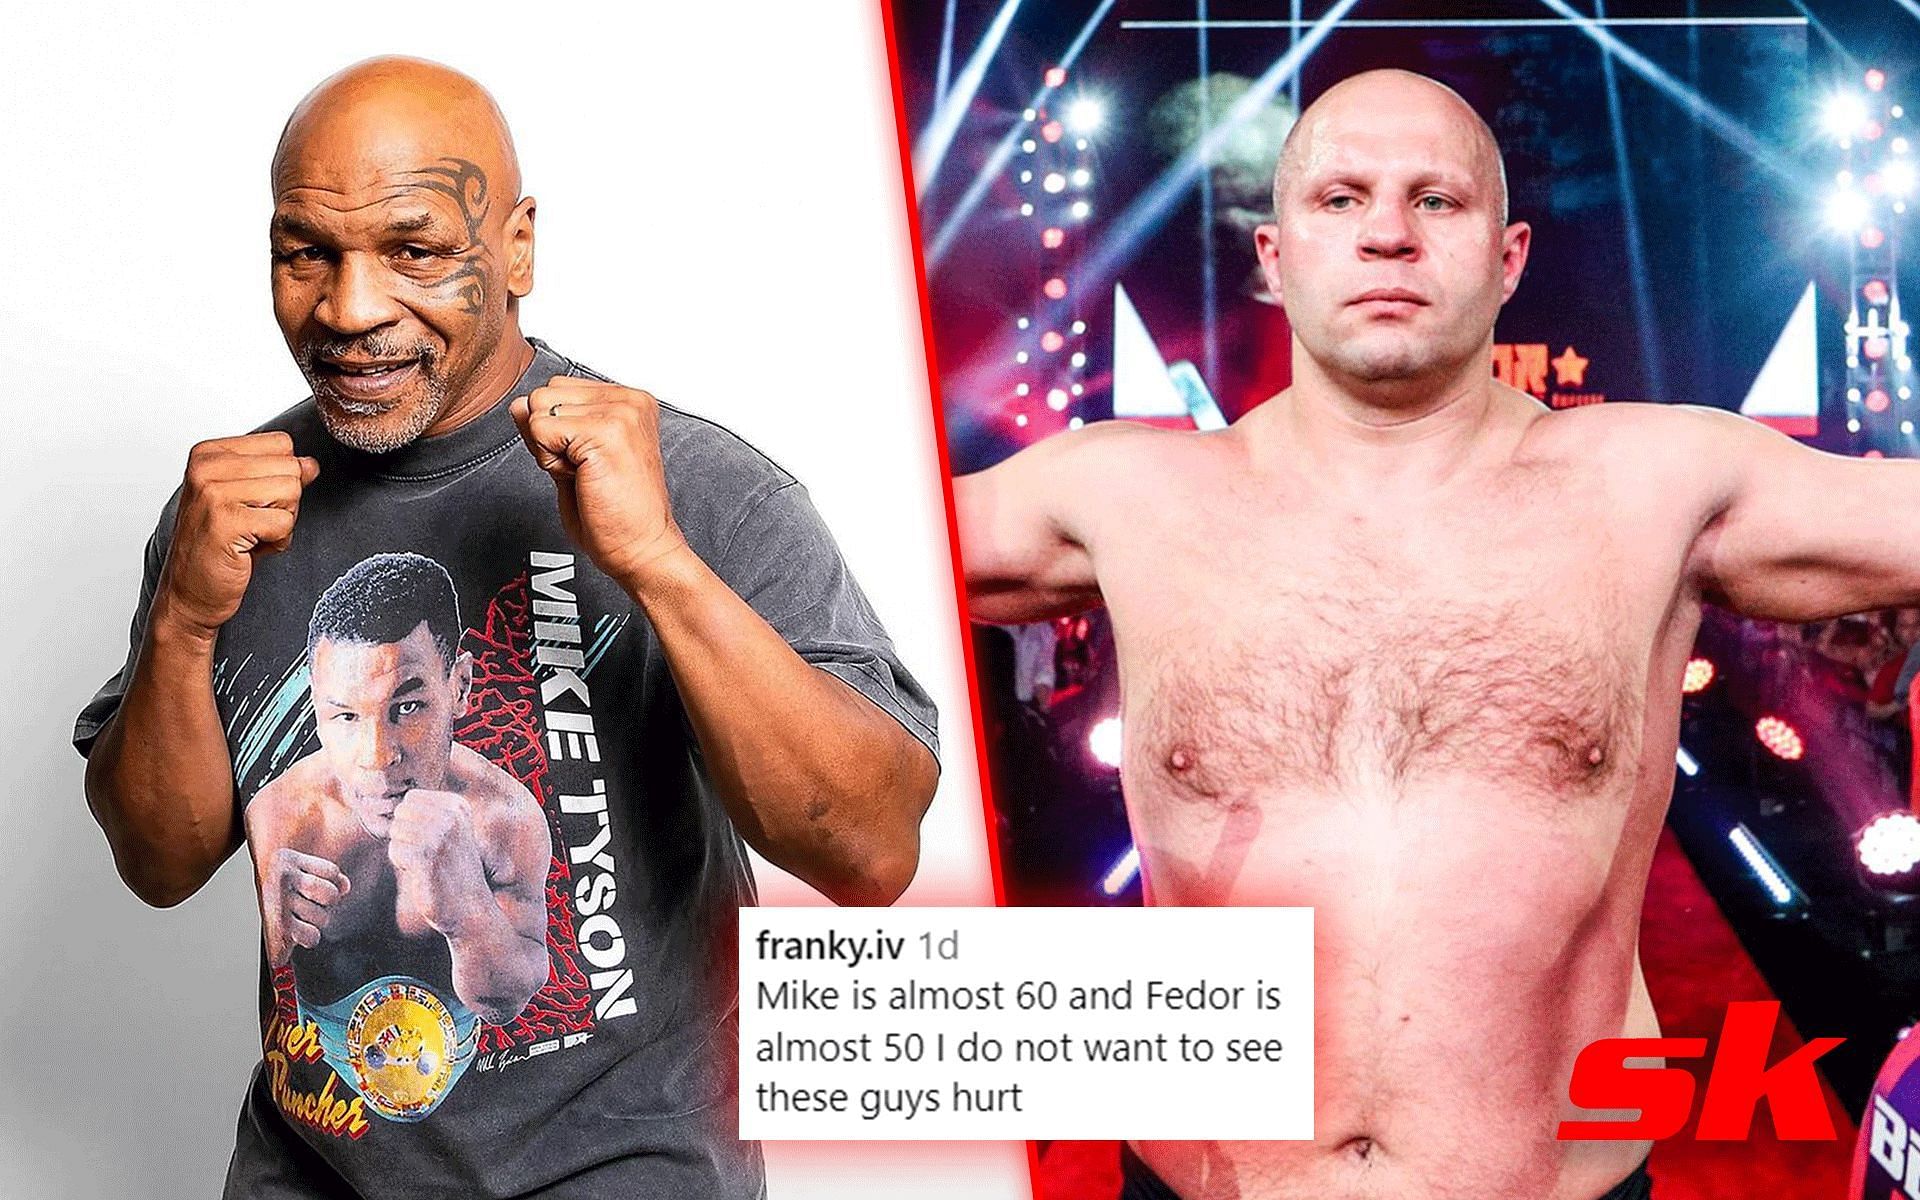 Fans react to potential Mike Tyson (left) vs. Fedor Emelianenko (right) boxing match [Image via: Getty Images] 